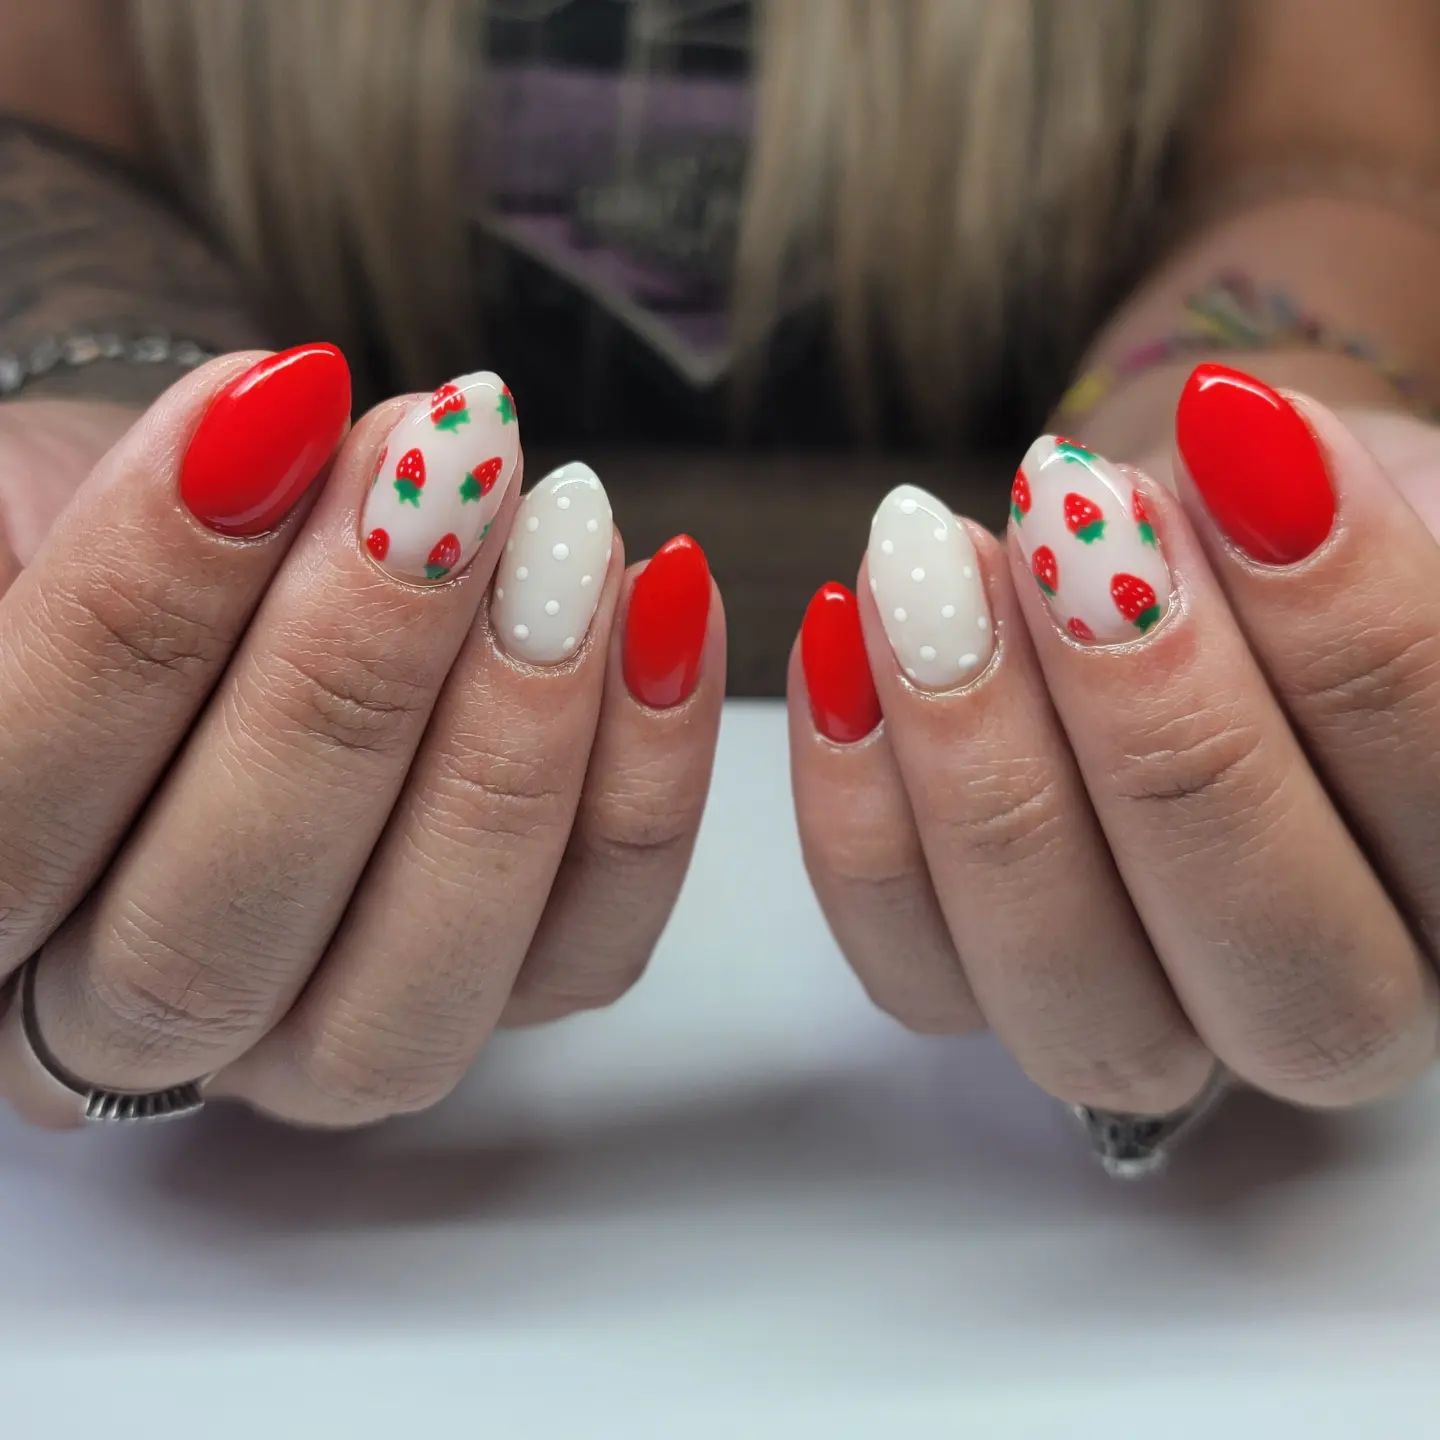 The fruit of summer, strawberries! When you wear red nail polish, it is a great idea to make it different by having strawberry accent nails.